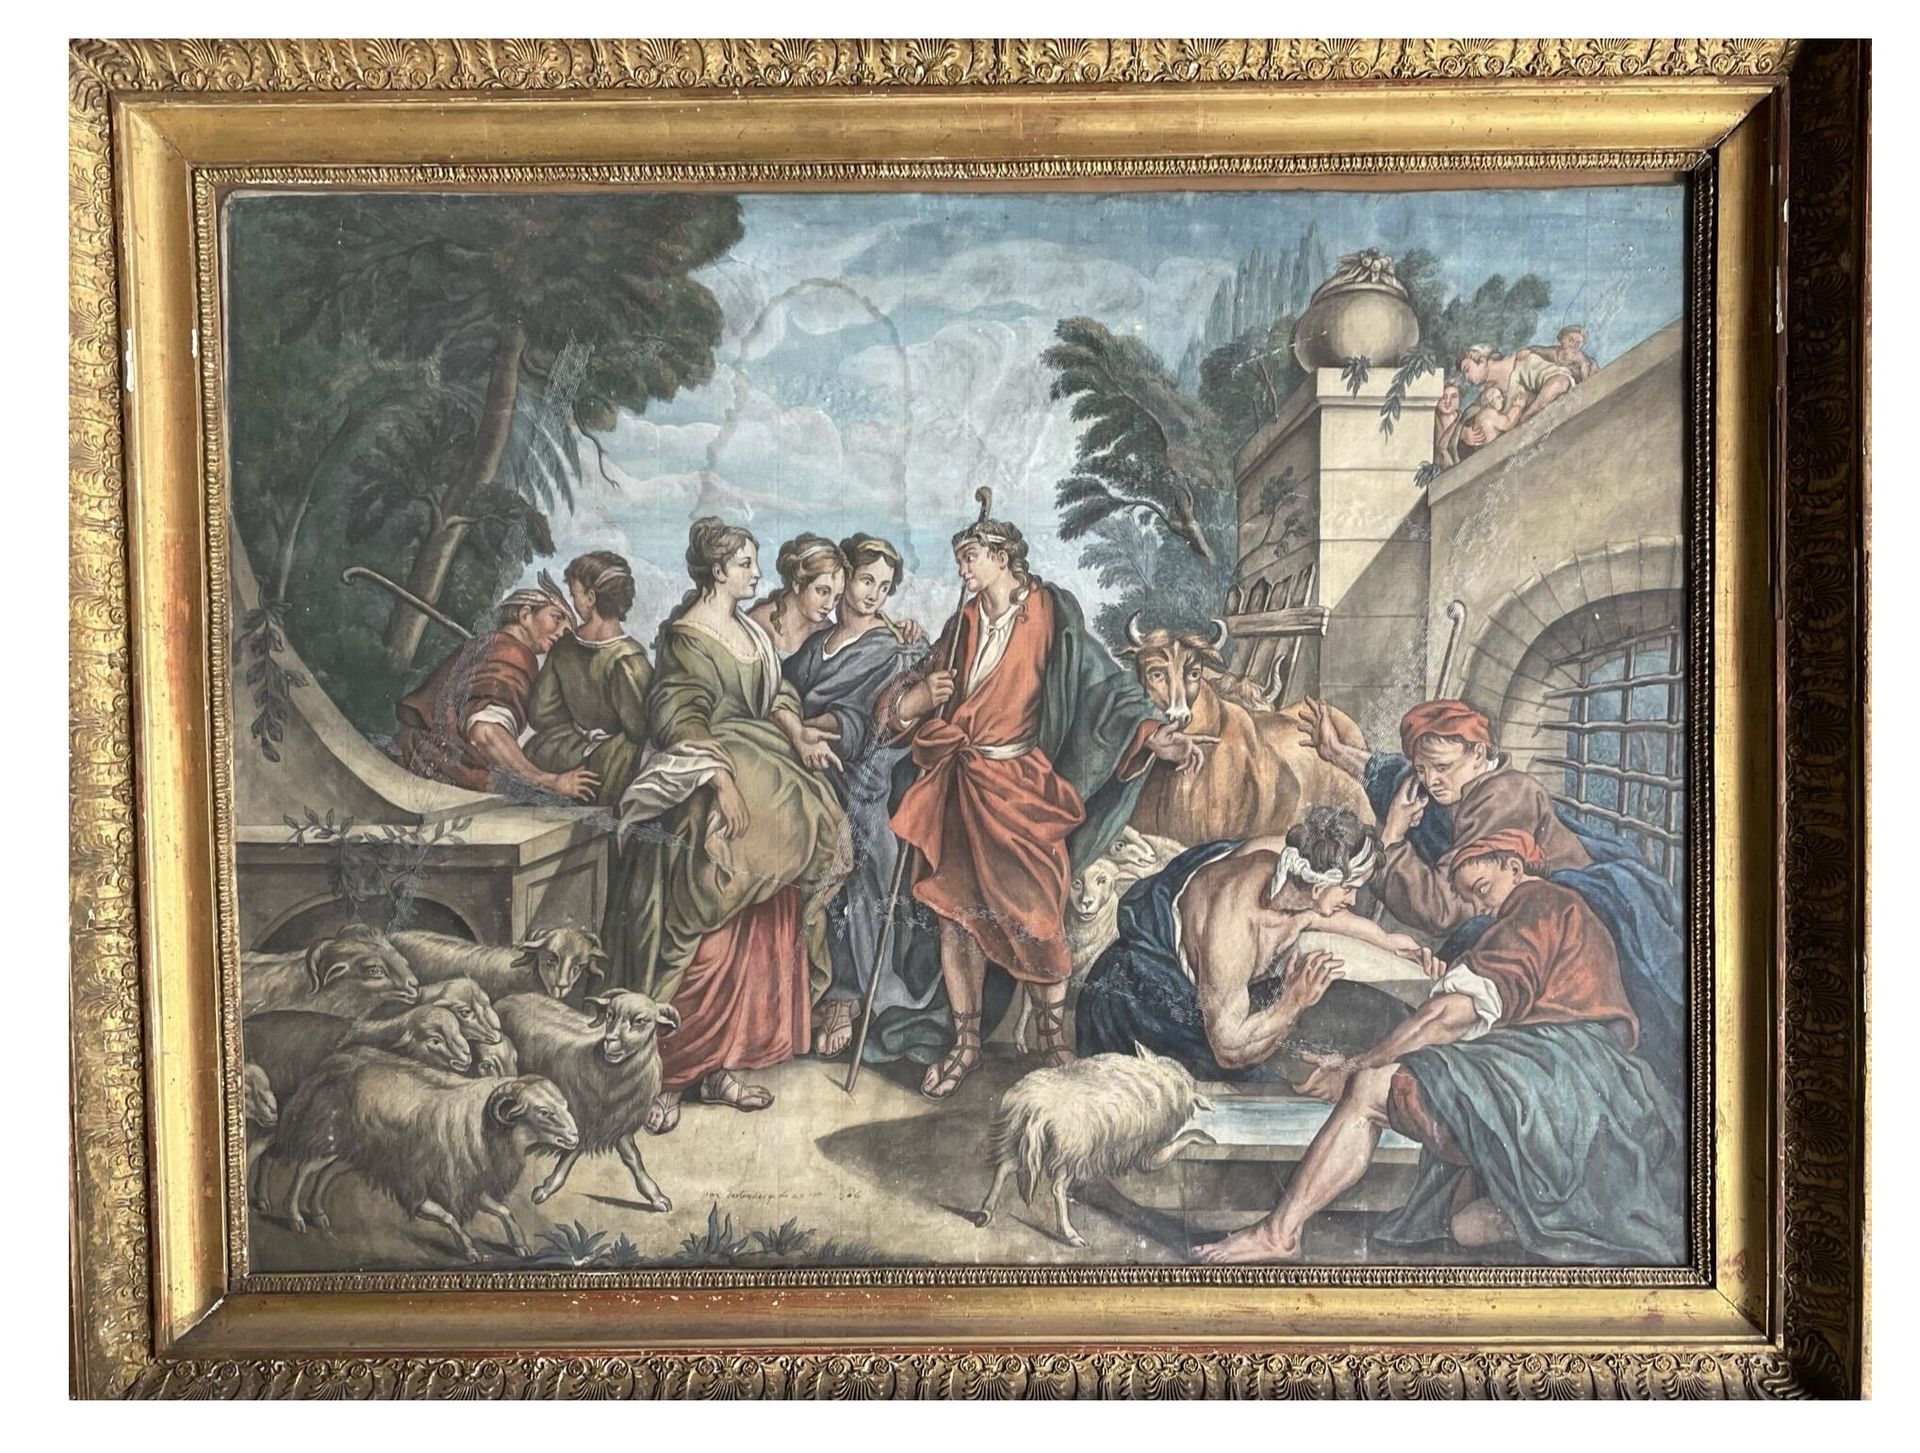 Null Neoclassical school of the 19th century

"The meeting of Jacob and Rachel a&hellip;